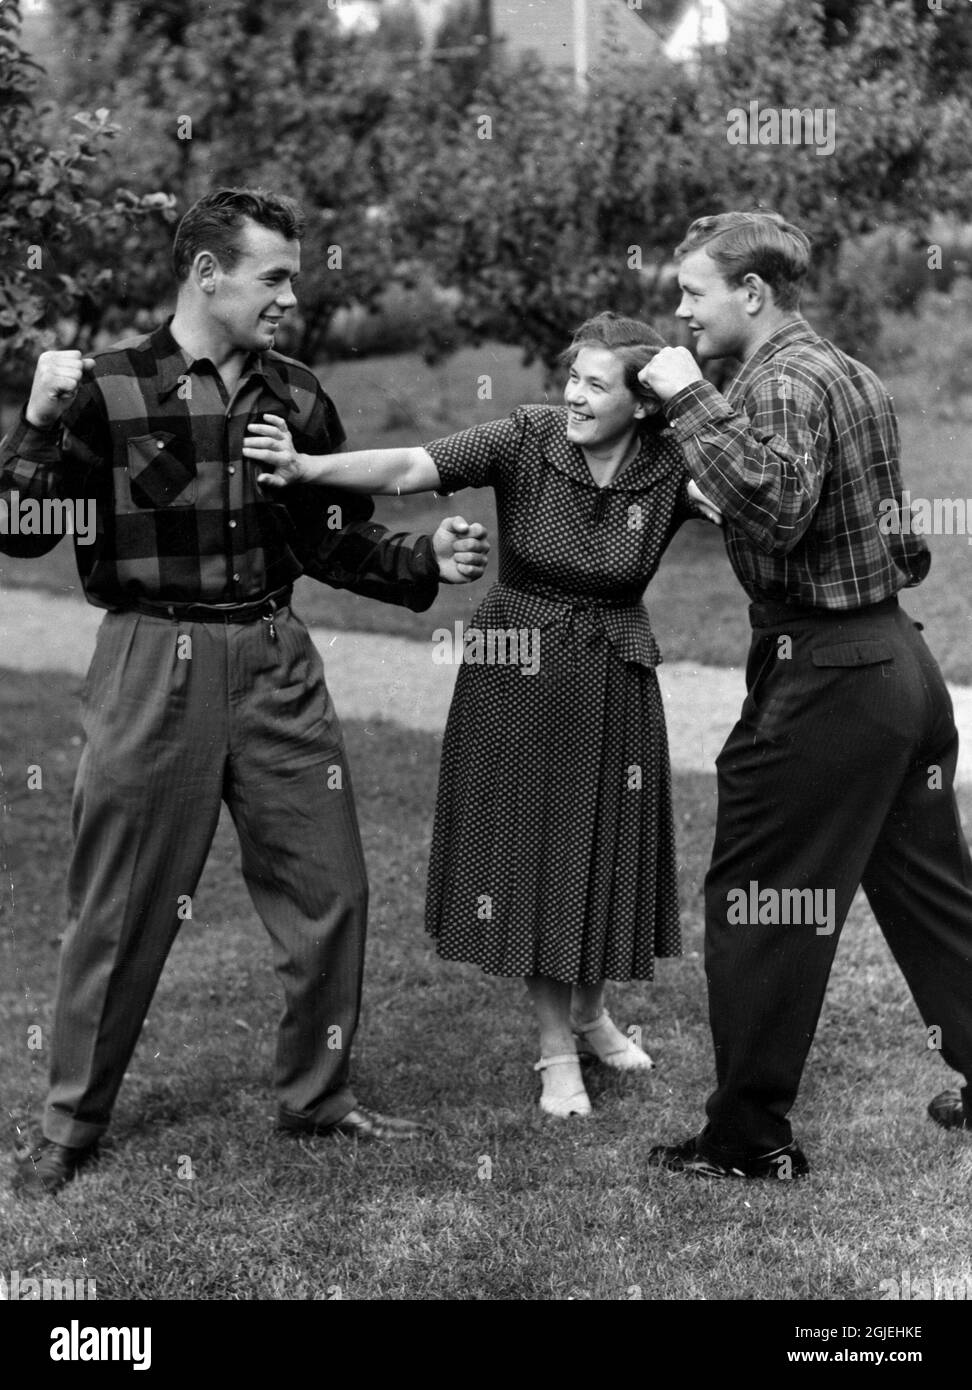 Ebba, mother of Swedish world heavyweight boxing champion Ingemar Johansson (L), separates Ingemar and his brother Henry during a 'fight' in the Johansson family's garden in Grimmered in Gothenburg in 1952. Stock Photo